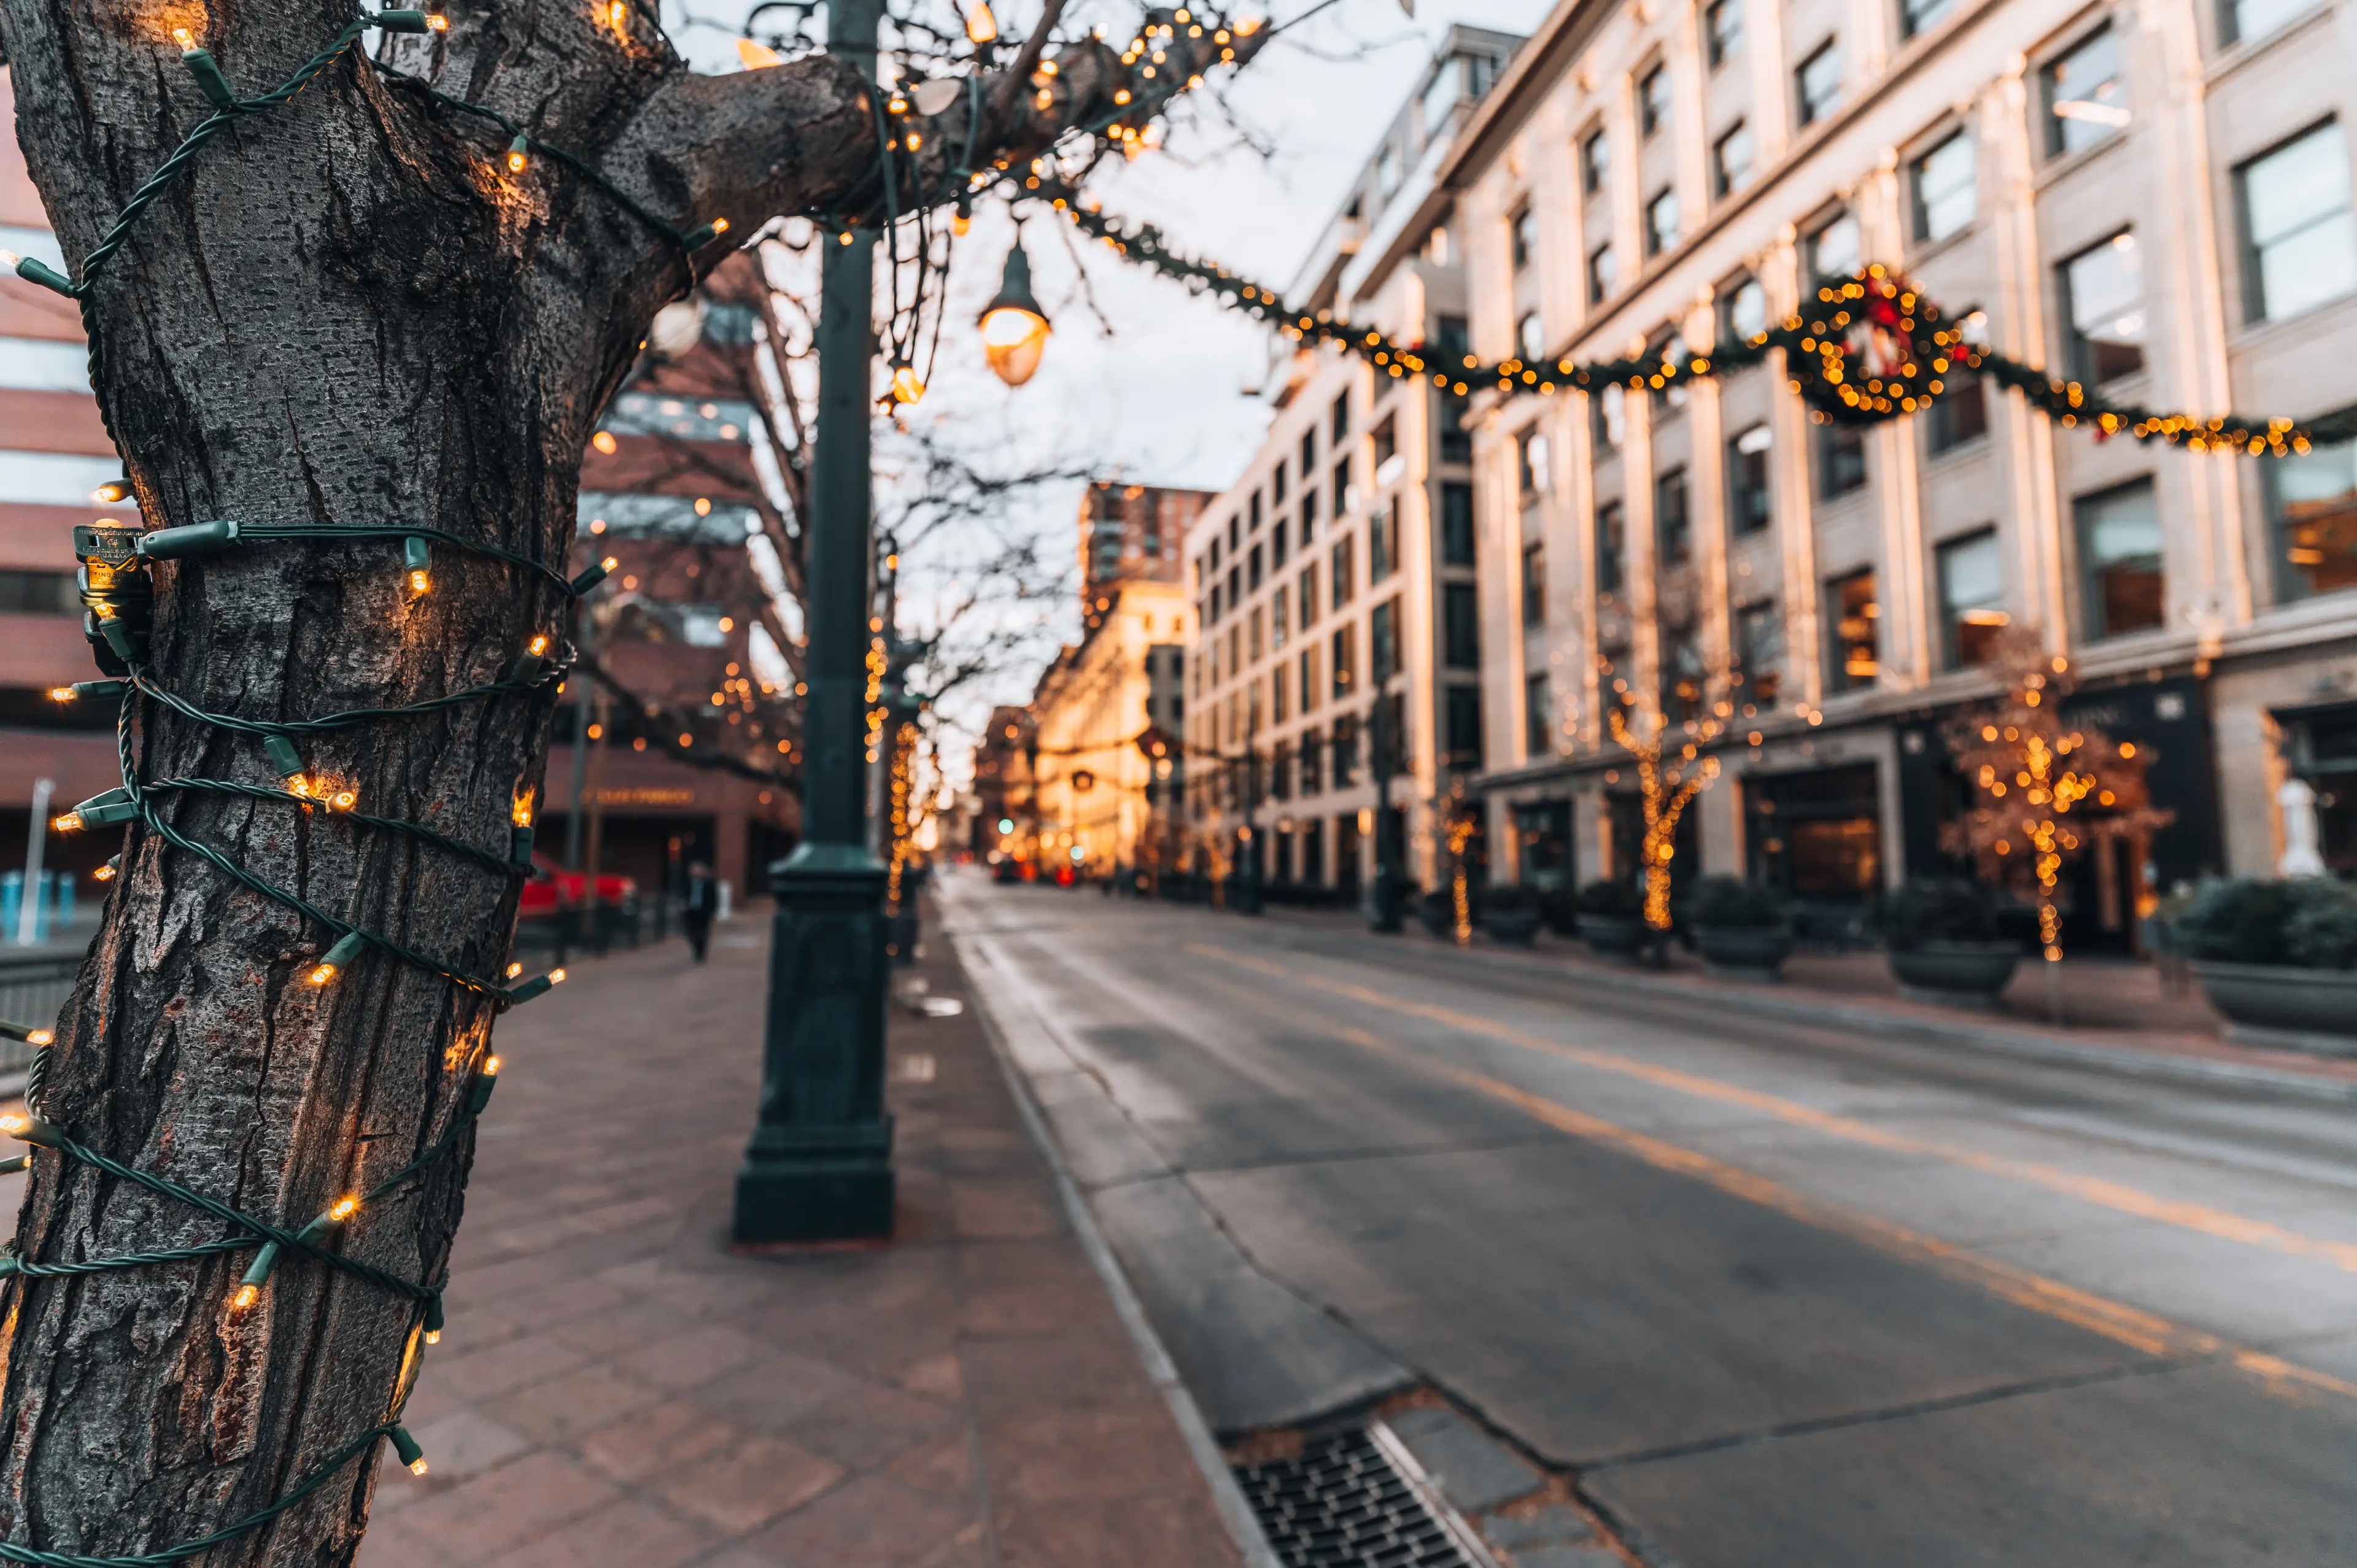 Christmas decorations in downtown Denver